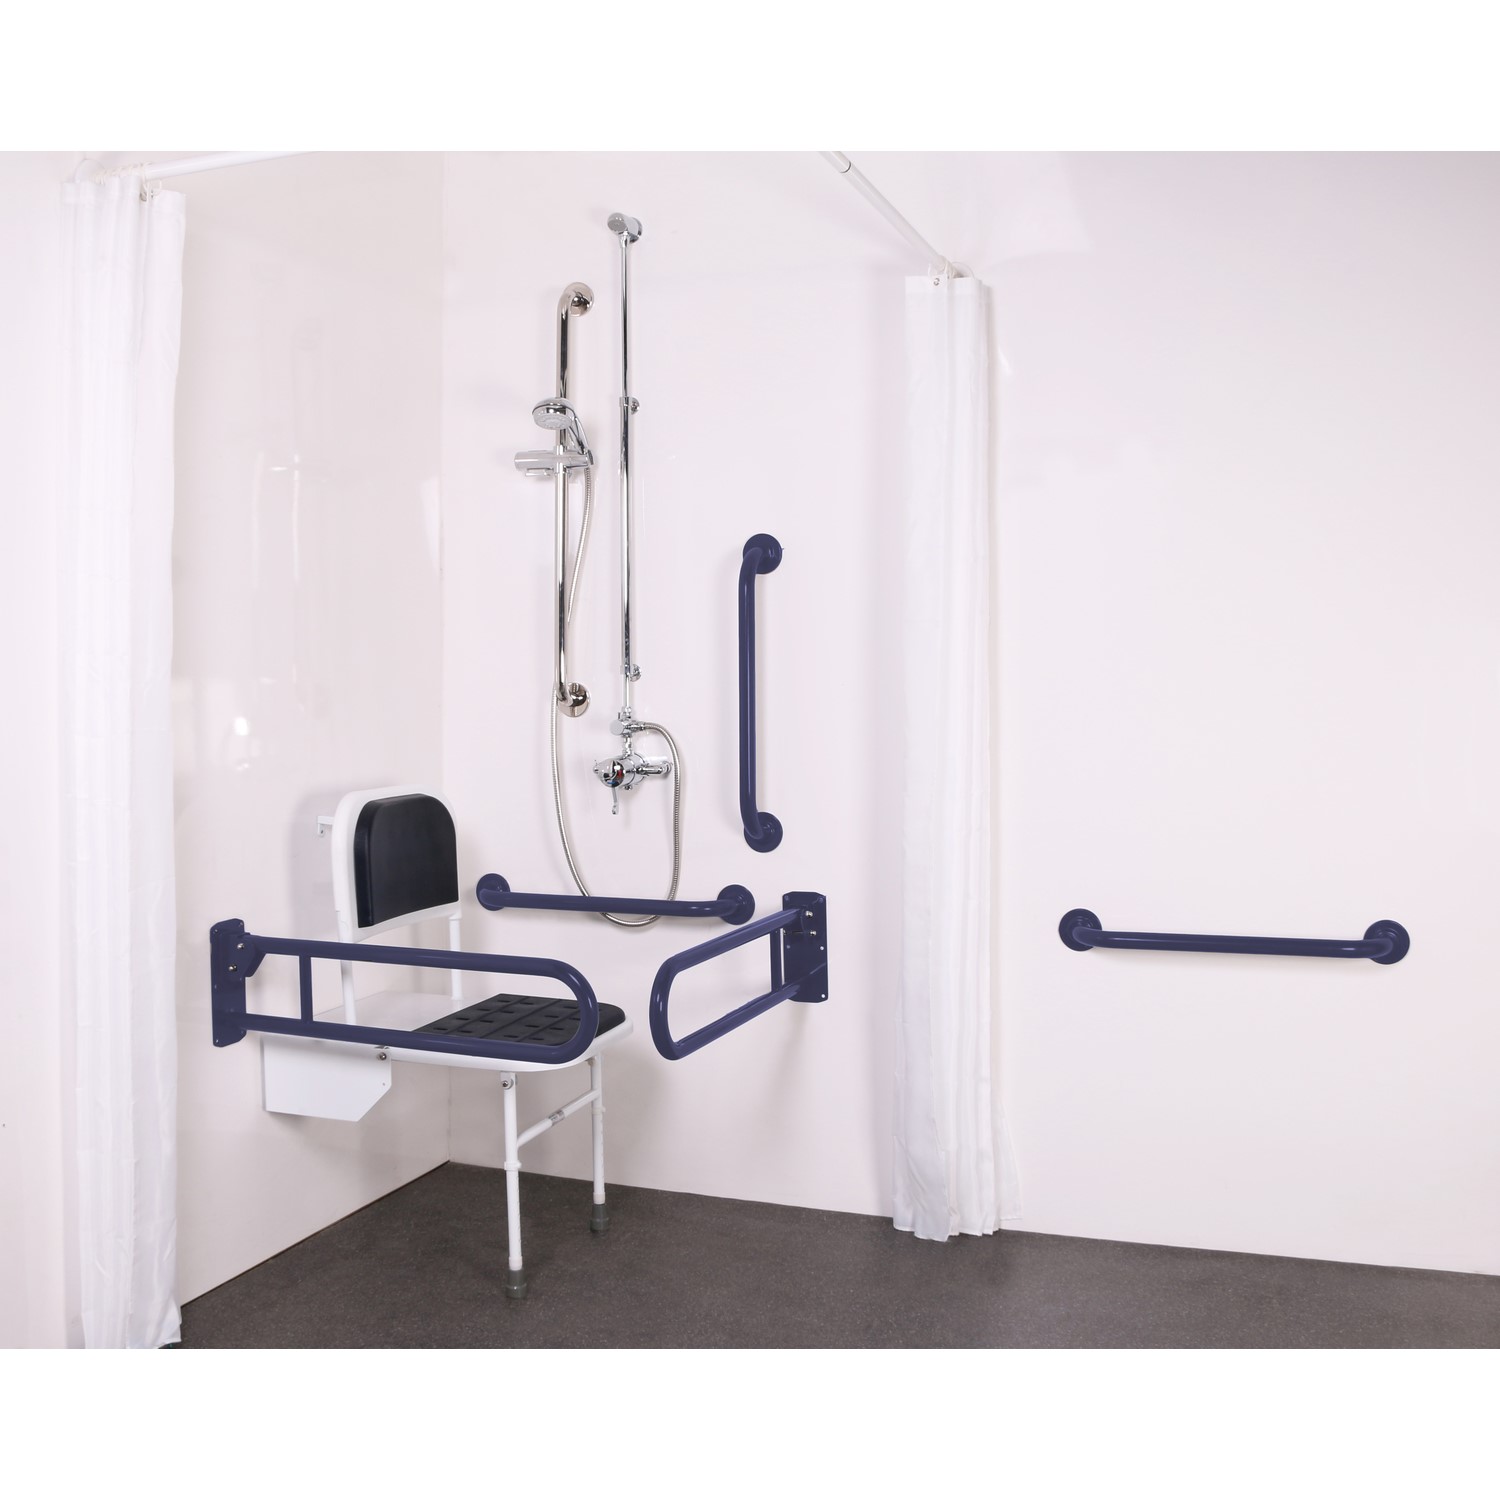 Exposed valve Doc M shower pack stainless steel concealed fixings dark blue